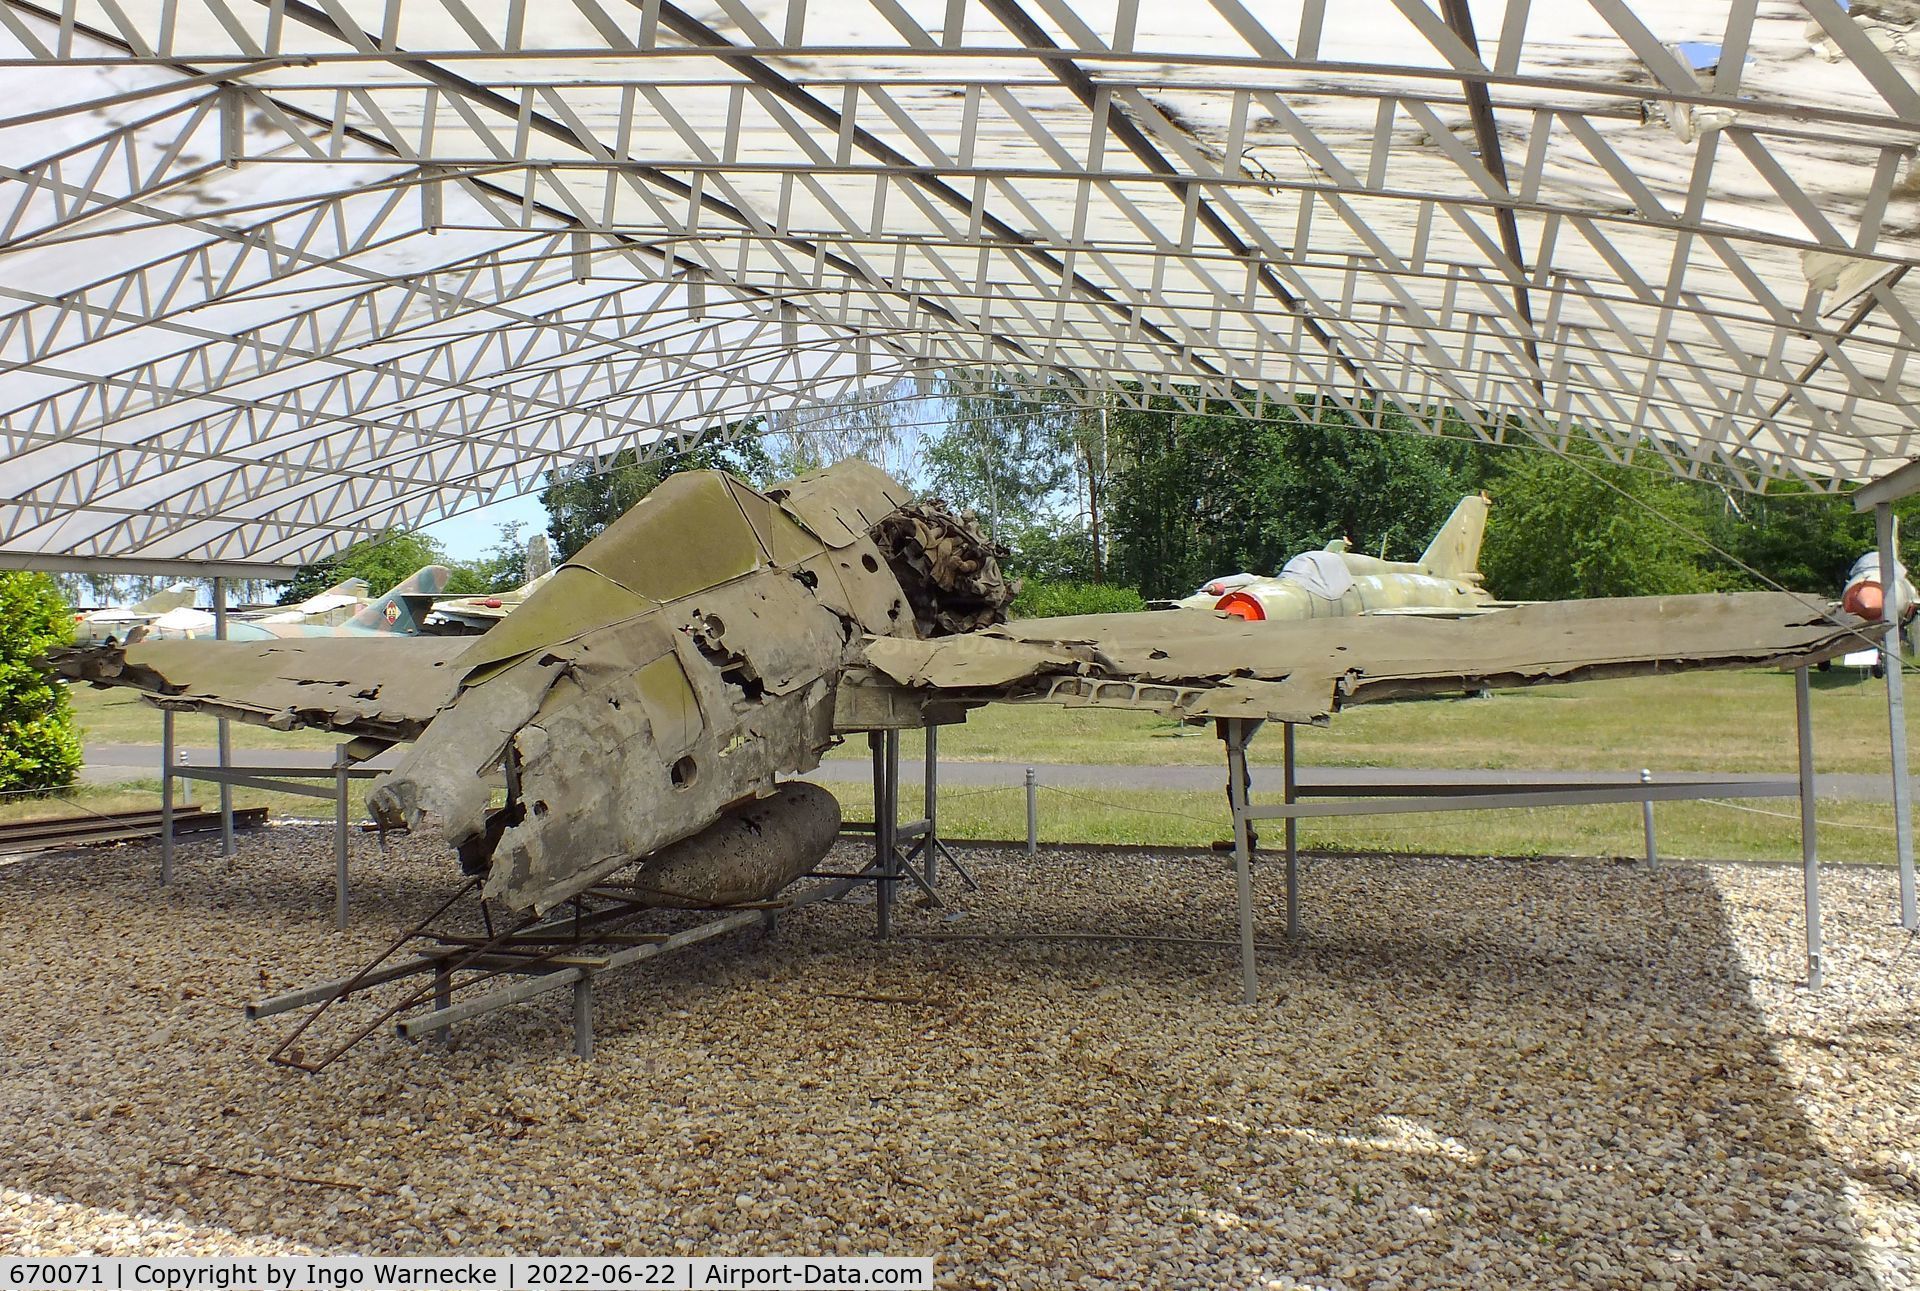 670071, Focke-Wulf Fw-190F-3 C/N Not found 670071, unrestored remains of a Focke-Wulf Fw 190F-3 wreck (forward fuselage and wings) at the Flugplatzmuseum Cottbus (Cottbus airfield museum)